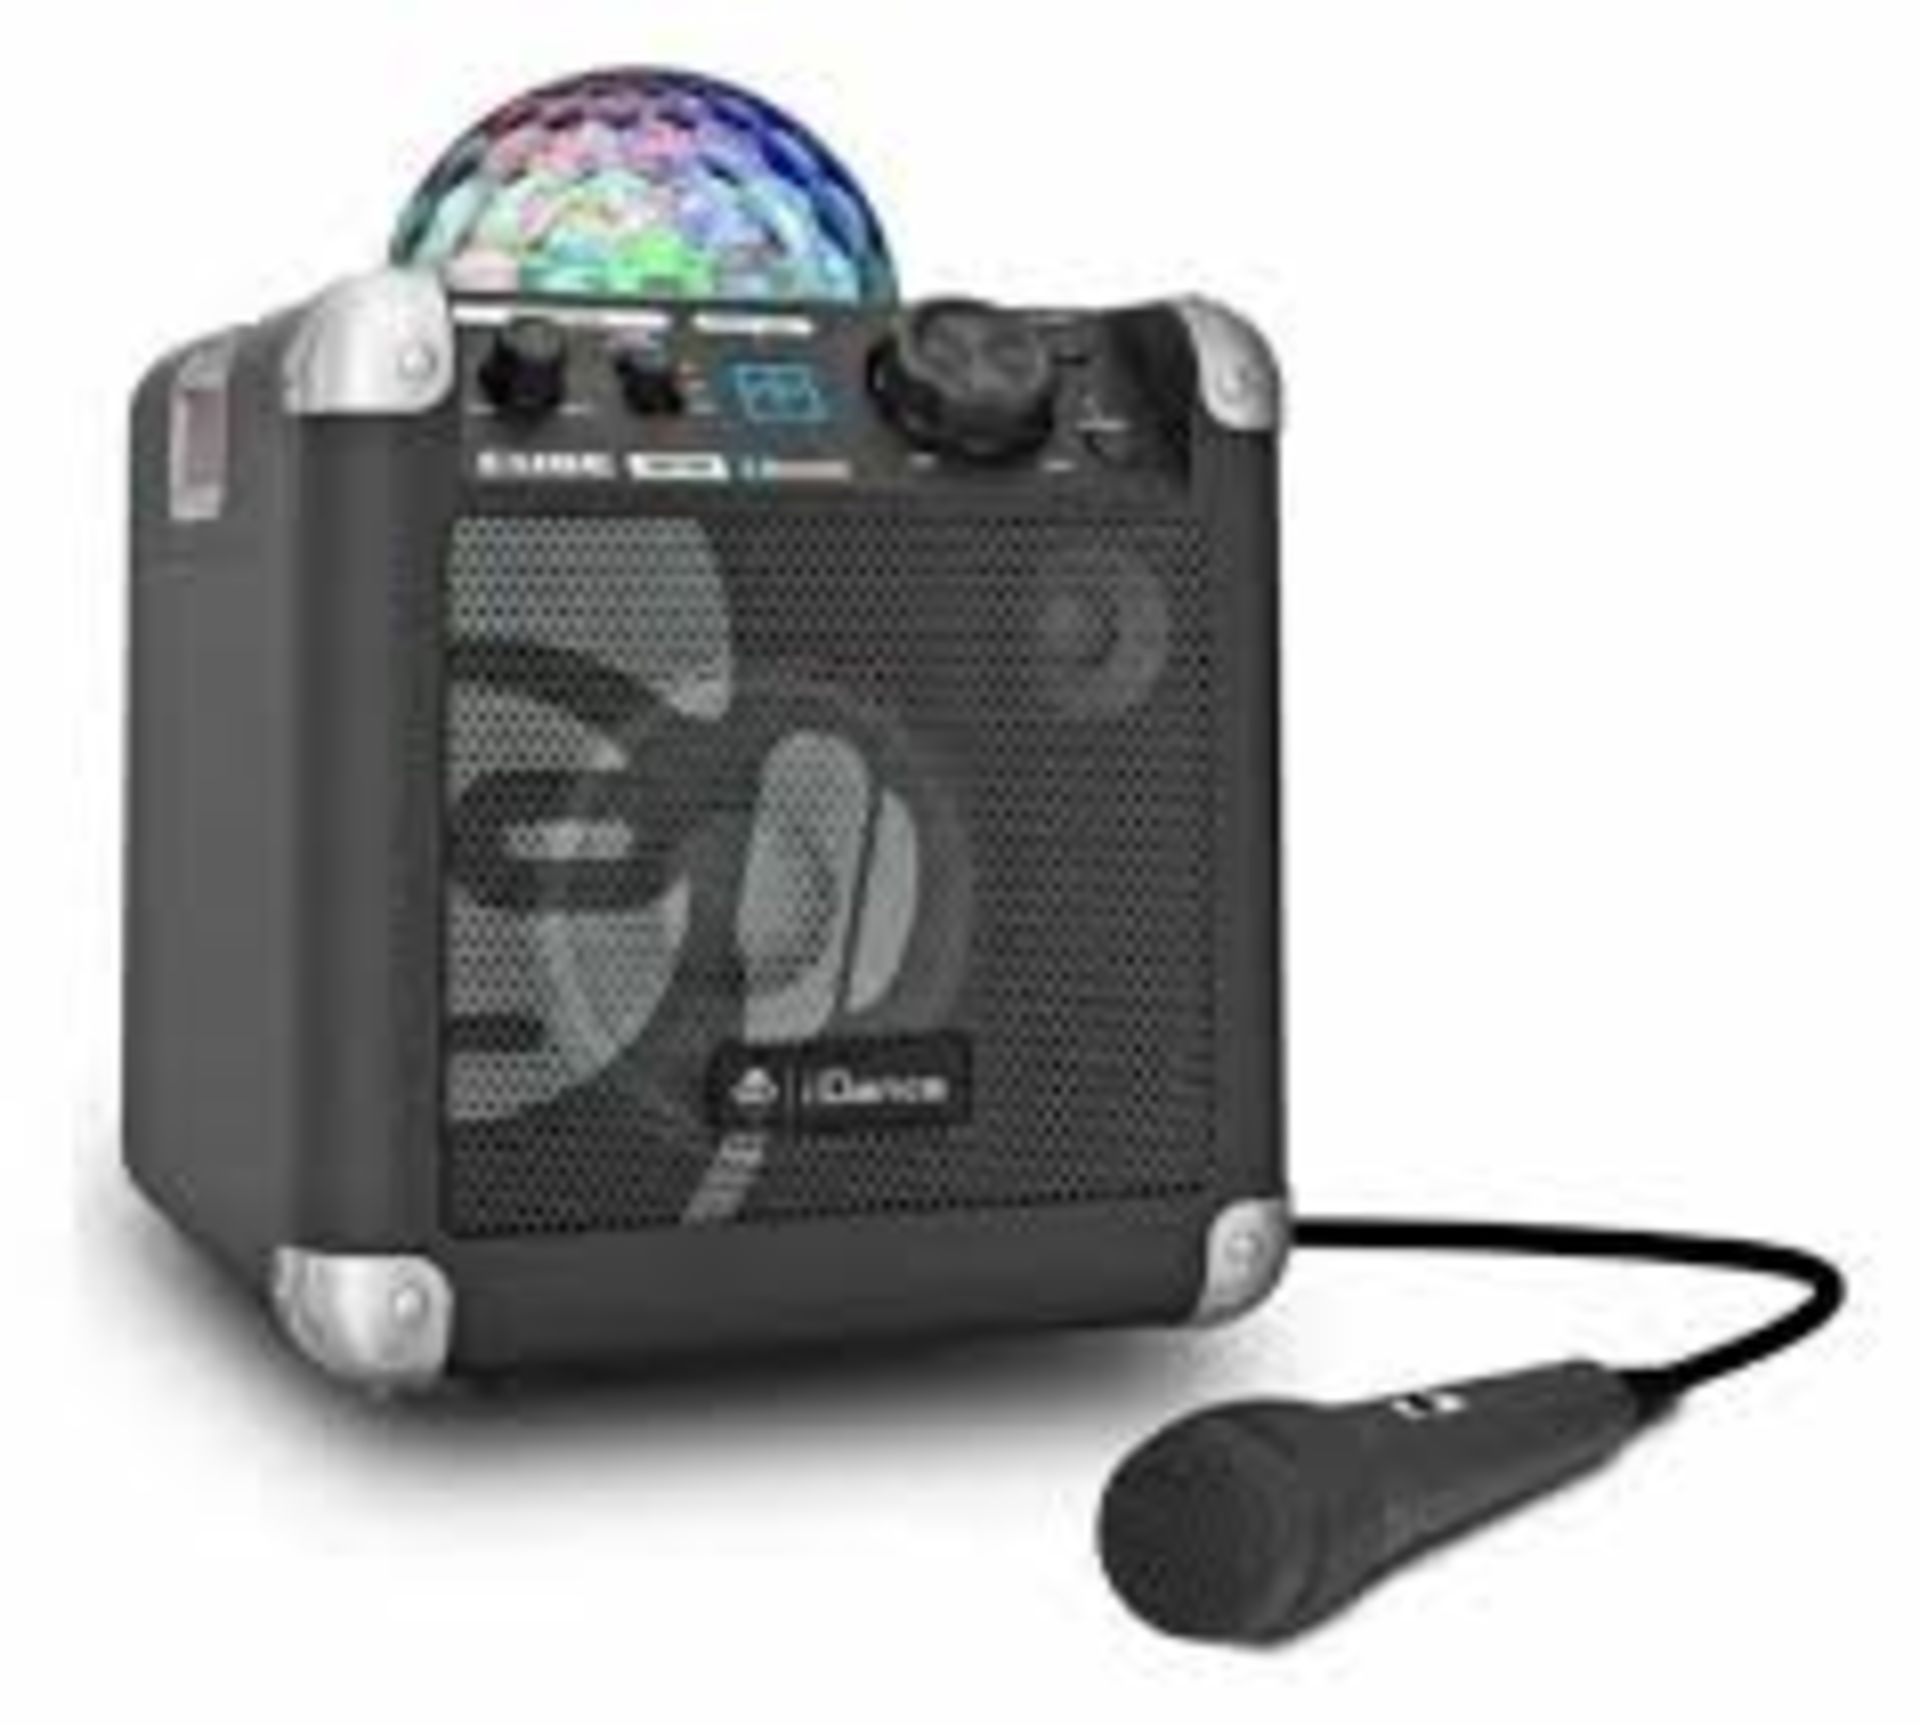 Trade Lot 5 X iDance sing cube with light show, 50 Watt all-in-one PA system Party light disco